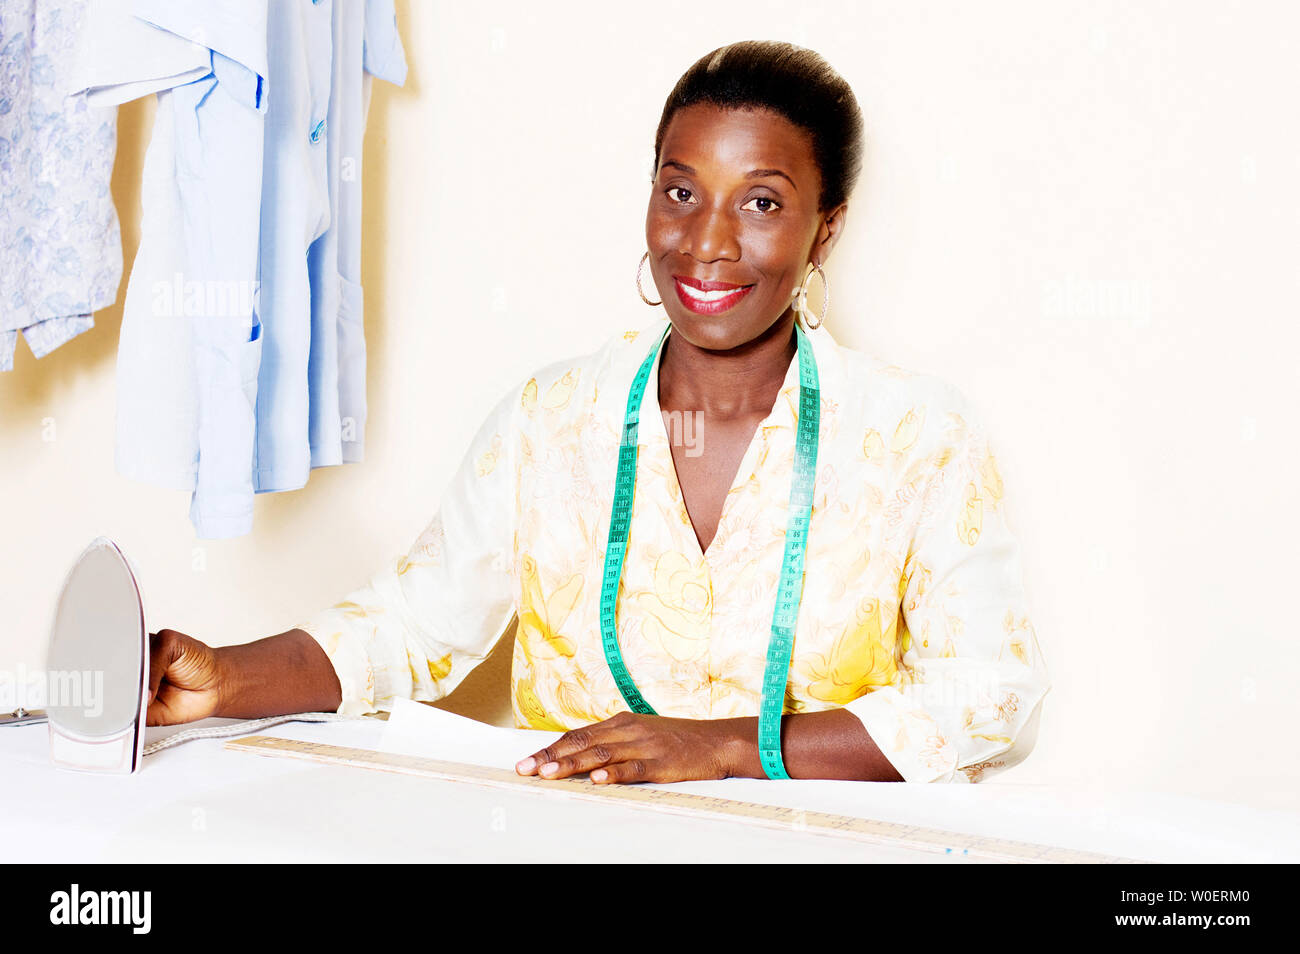 Young smiling seamstress holding an iron in front of her work table. Stock Photo